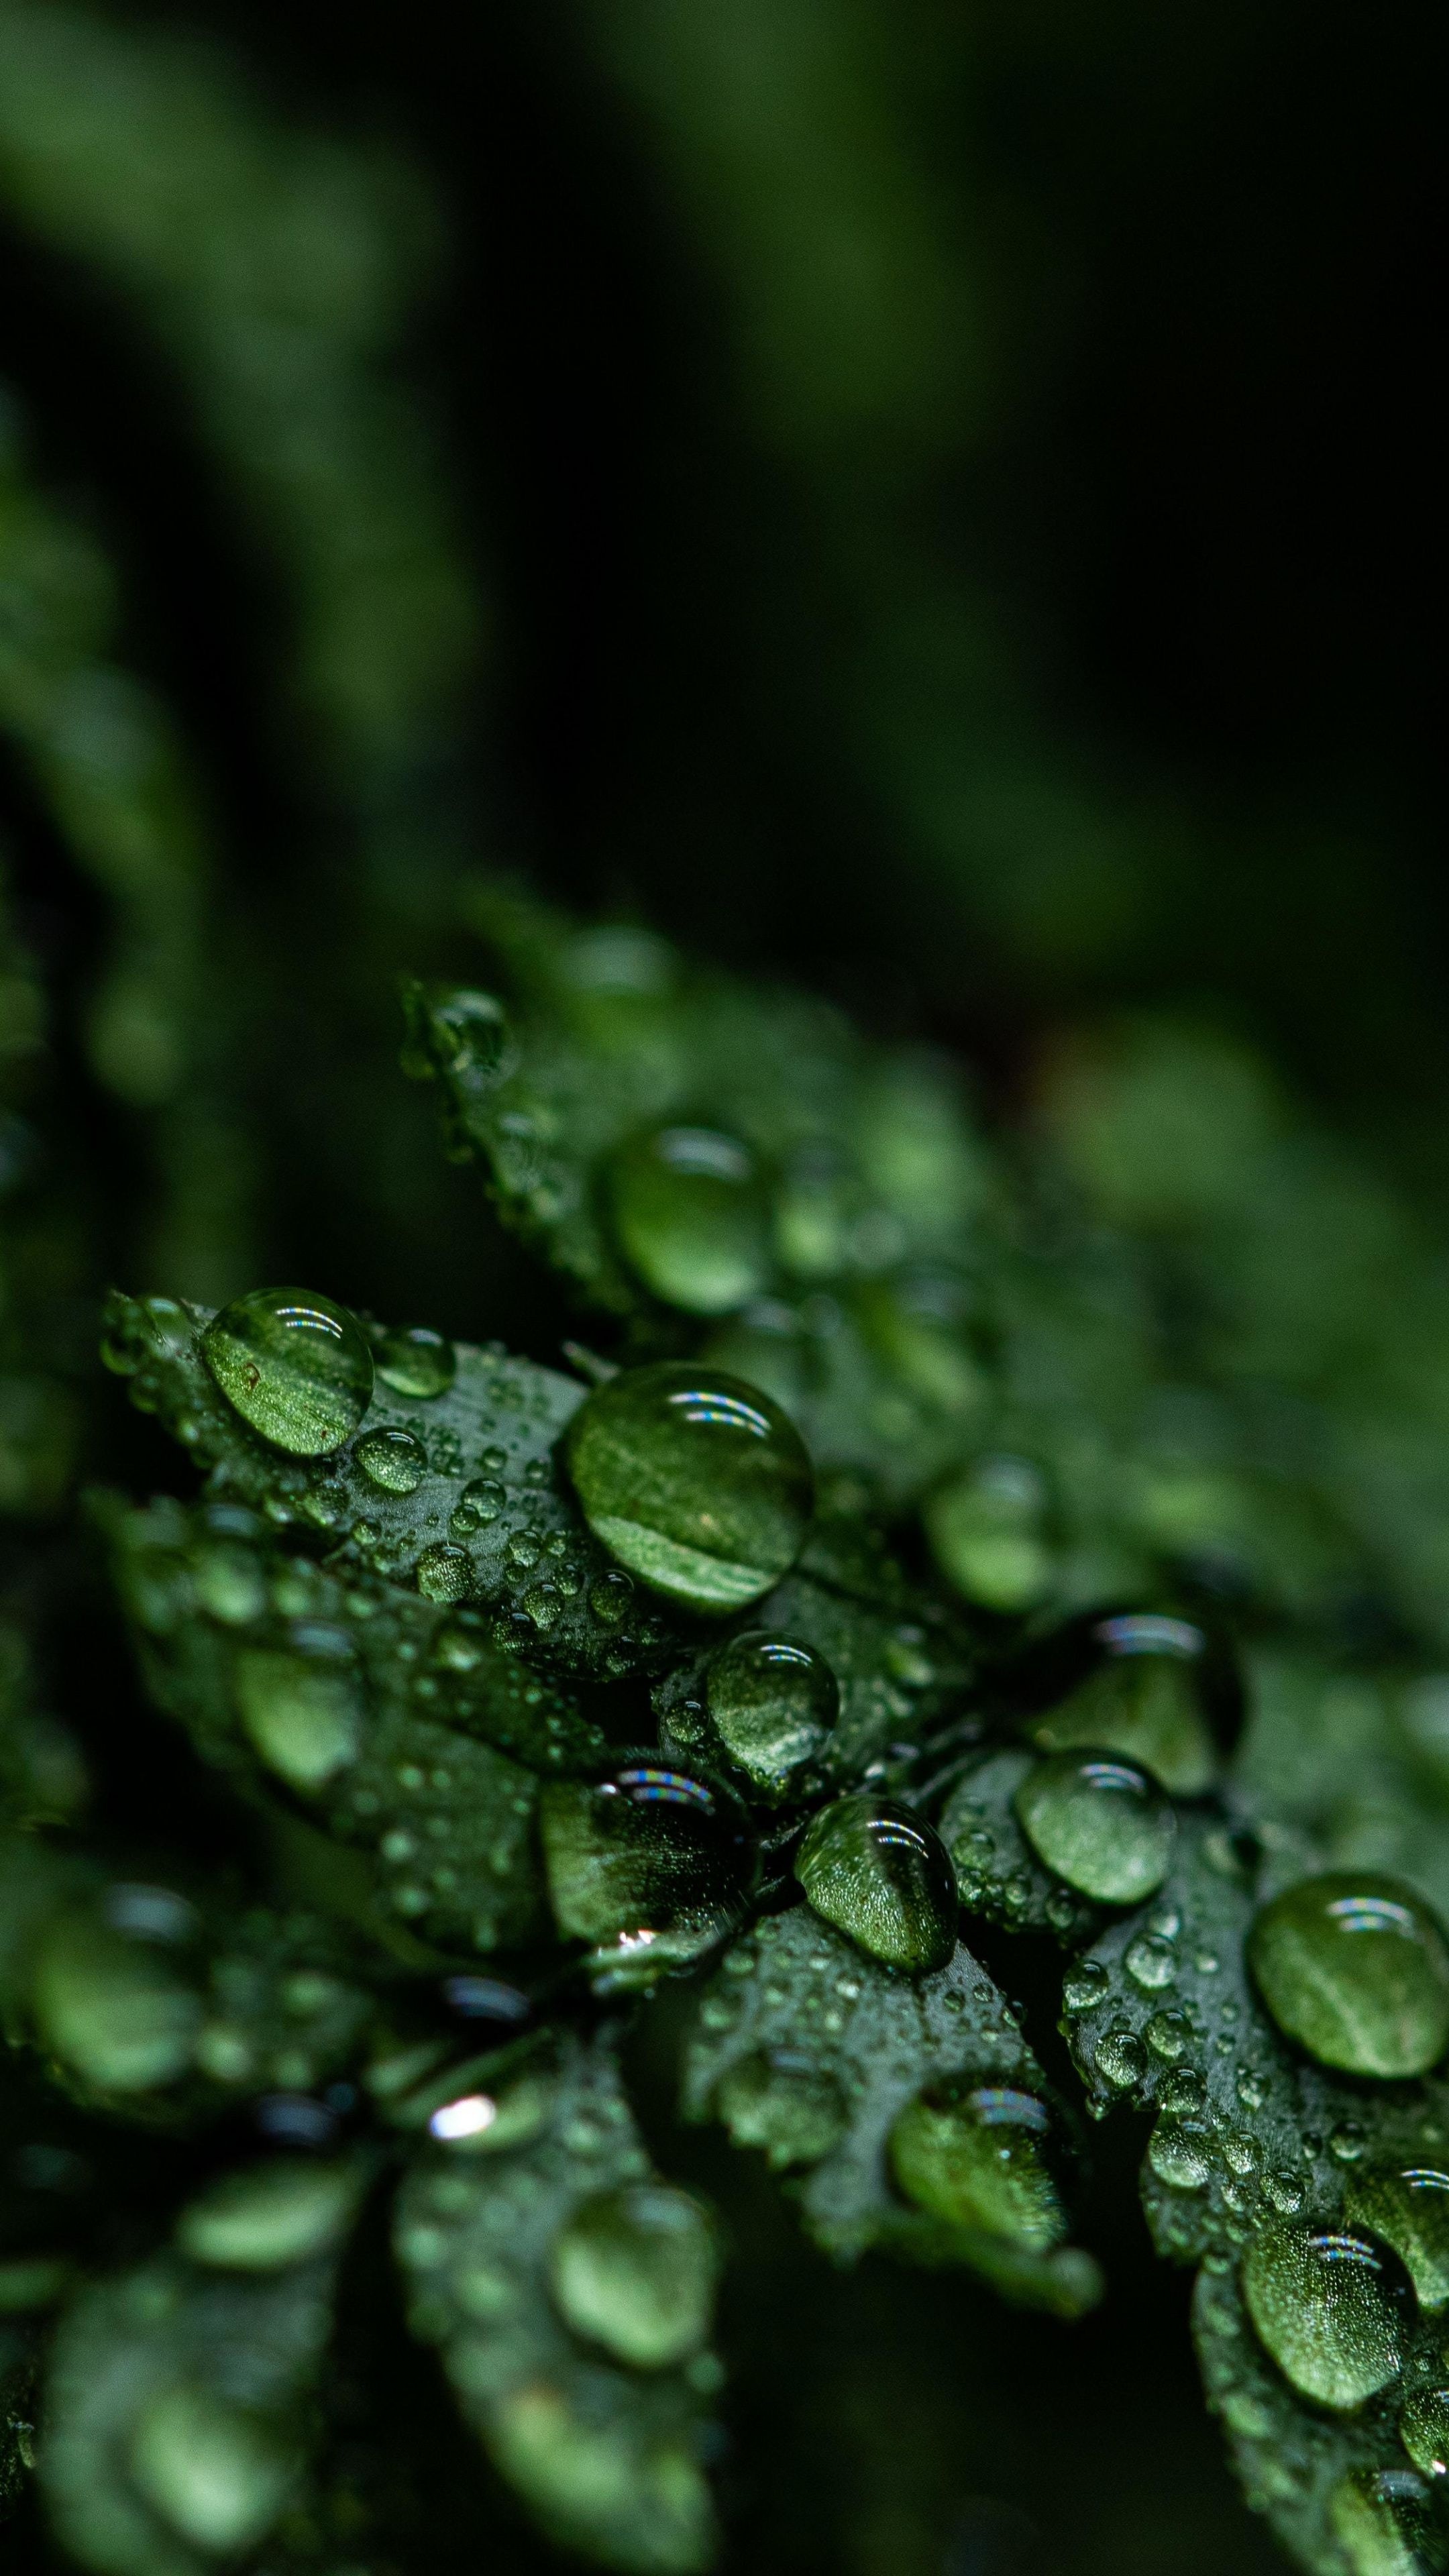 Green Leaf: The amazing aesthetic of close-up dark green leaves covered with raindrops. 2160x3840 4K Wallpaper.